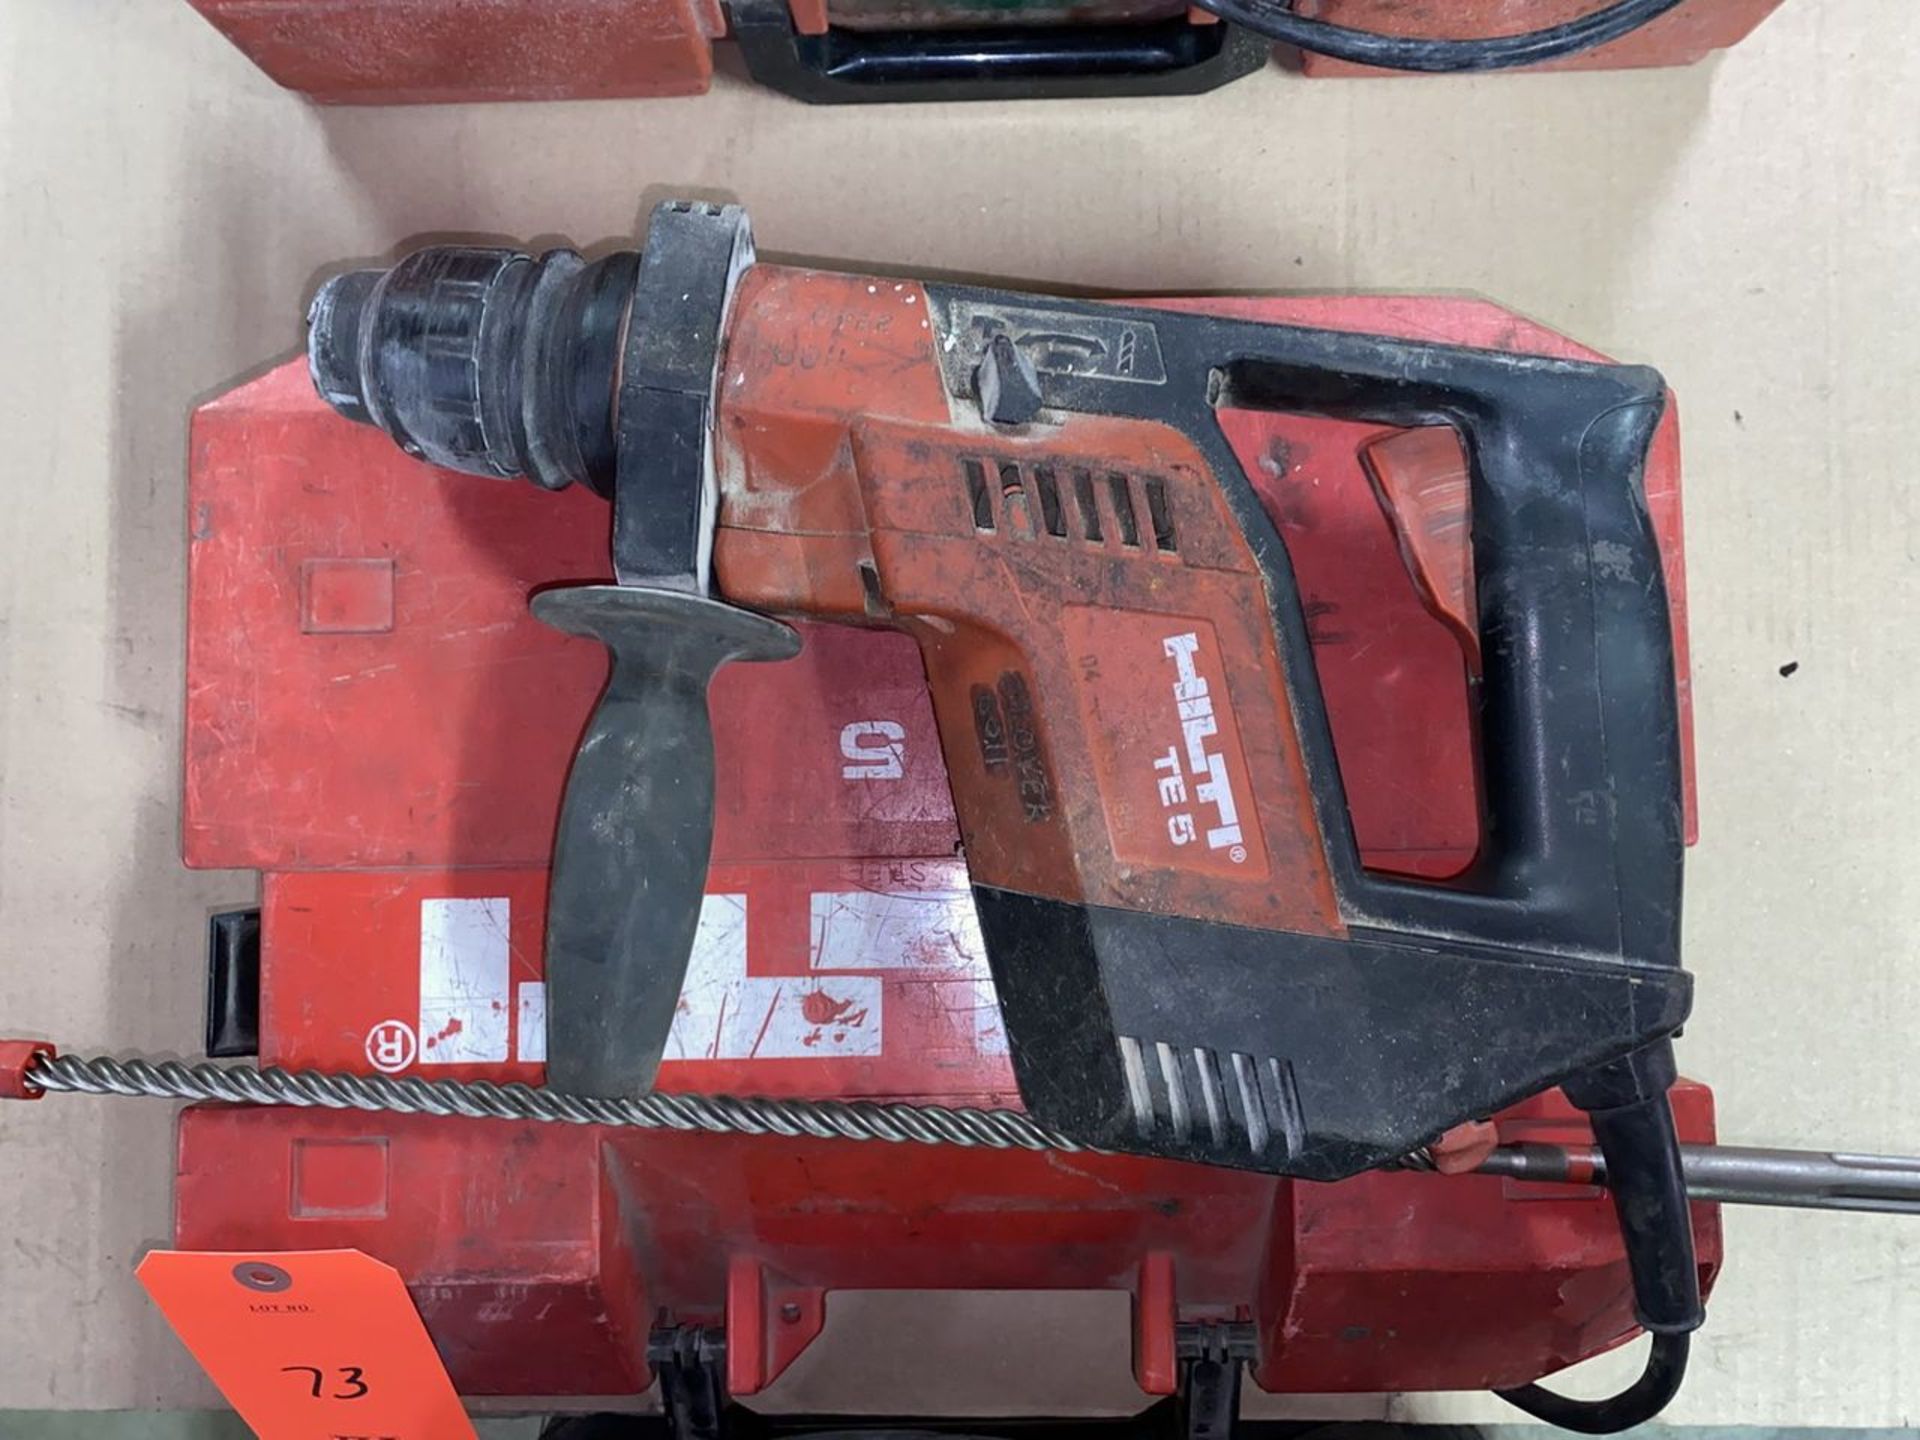 Hilti 1/2 in. Model TE-5 Rotary Hammer; 115-V, AC, with 1/2 in. Drill and Carrying Case - Image 2 of 2